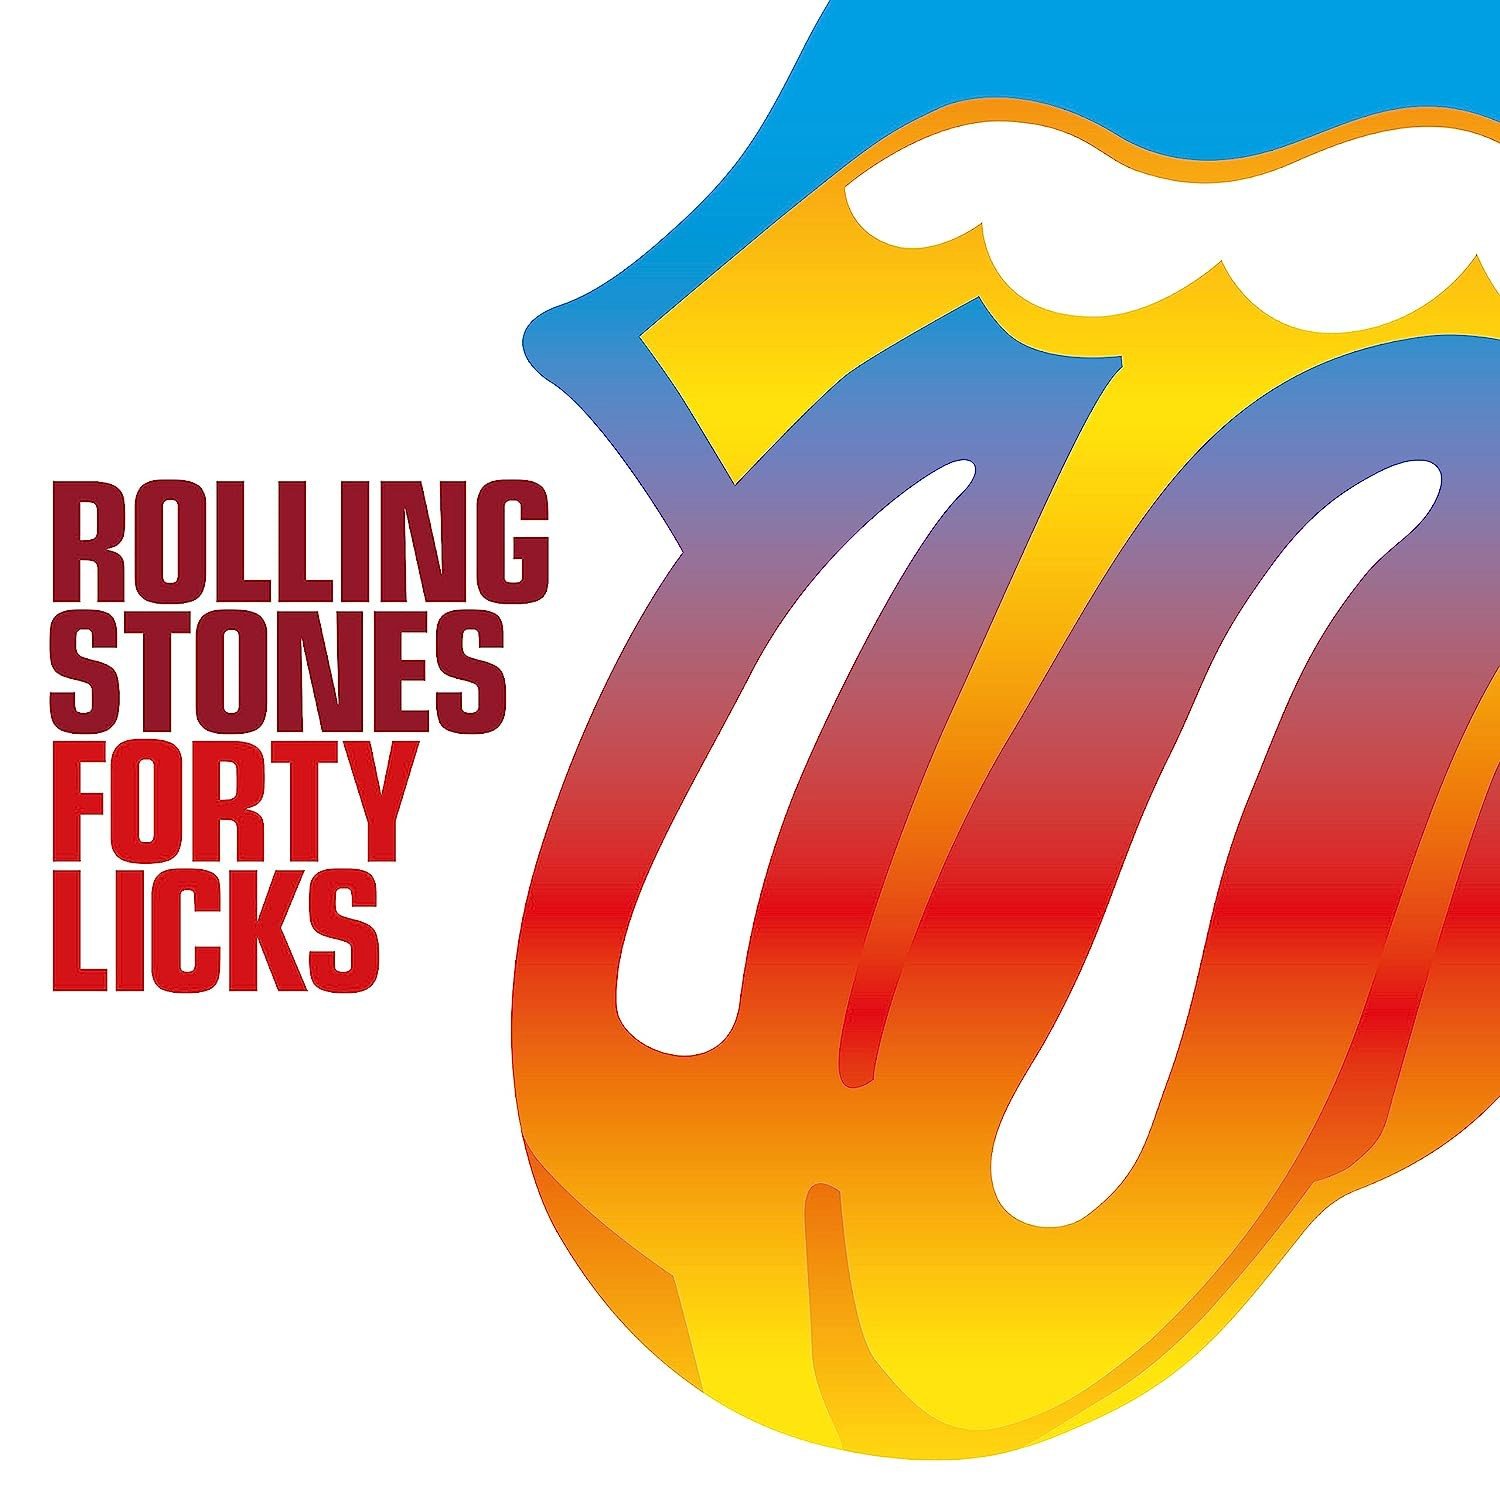 The Rolling Stones - Forty Licks (Limited!) - 4LP (LP)